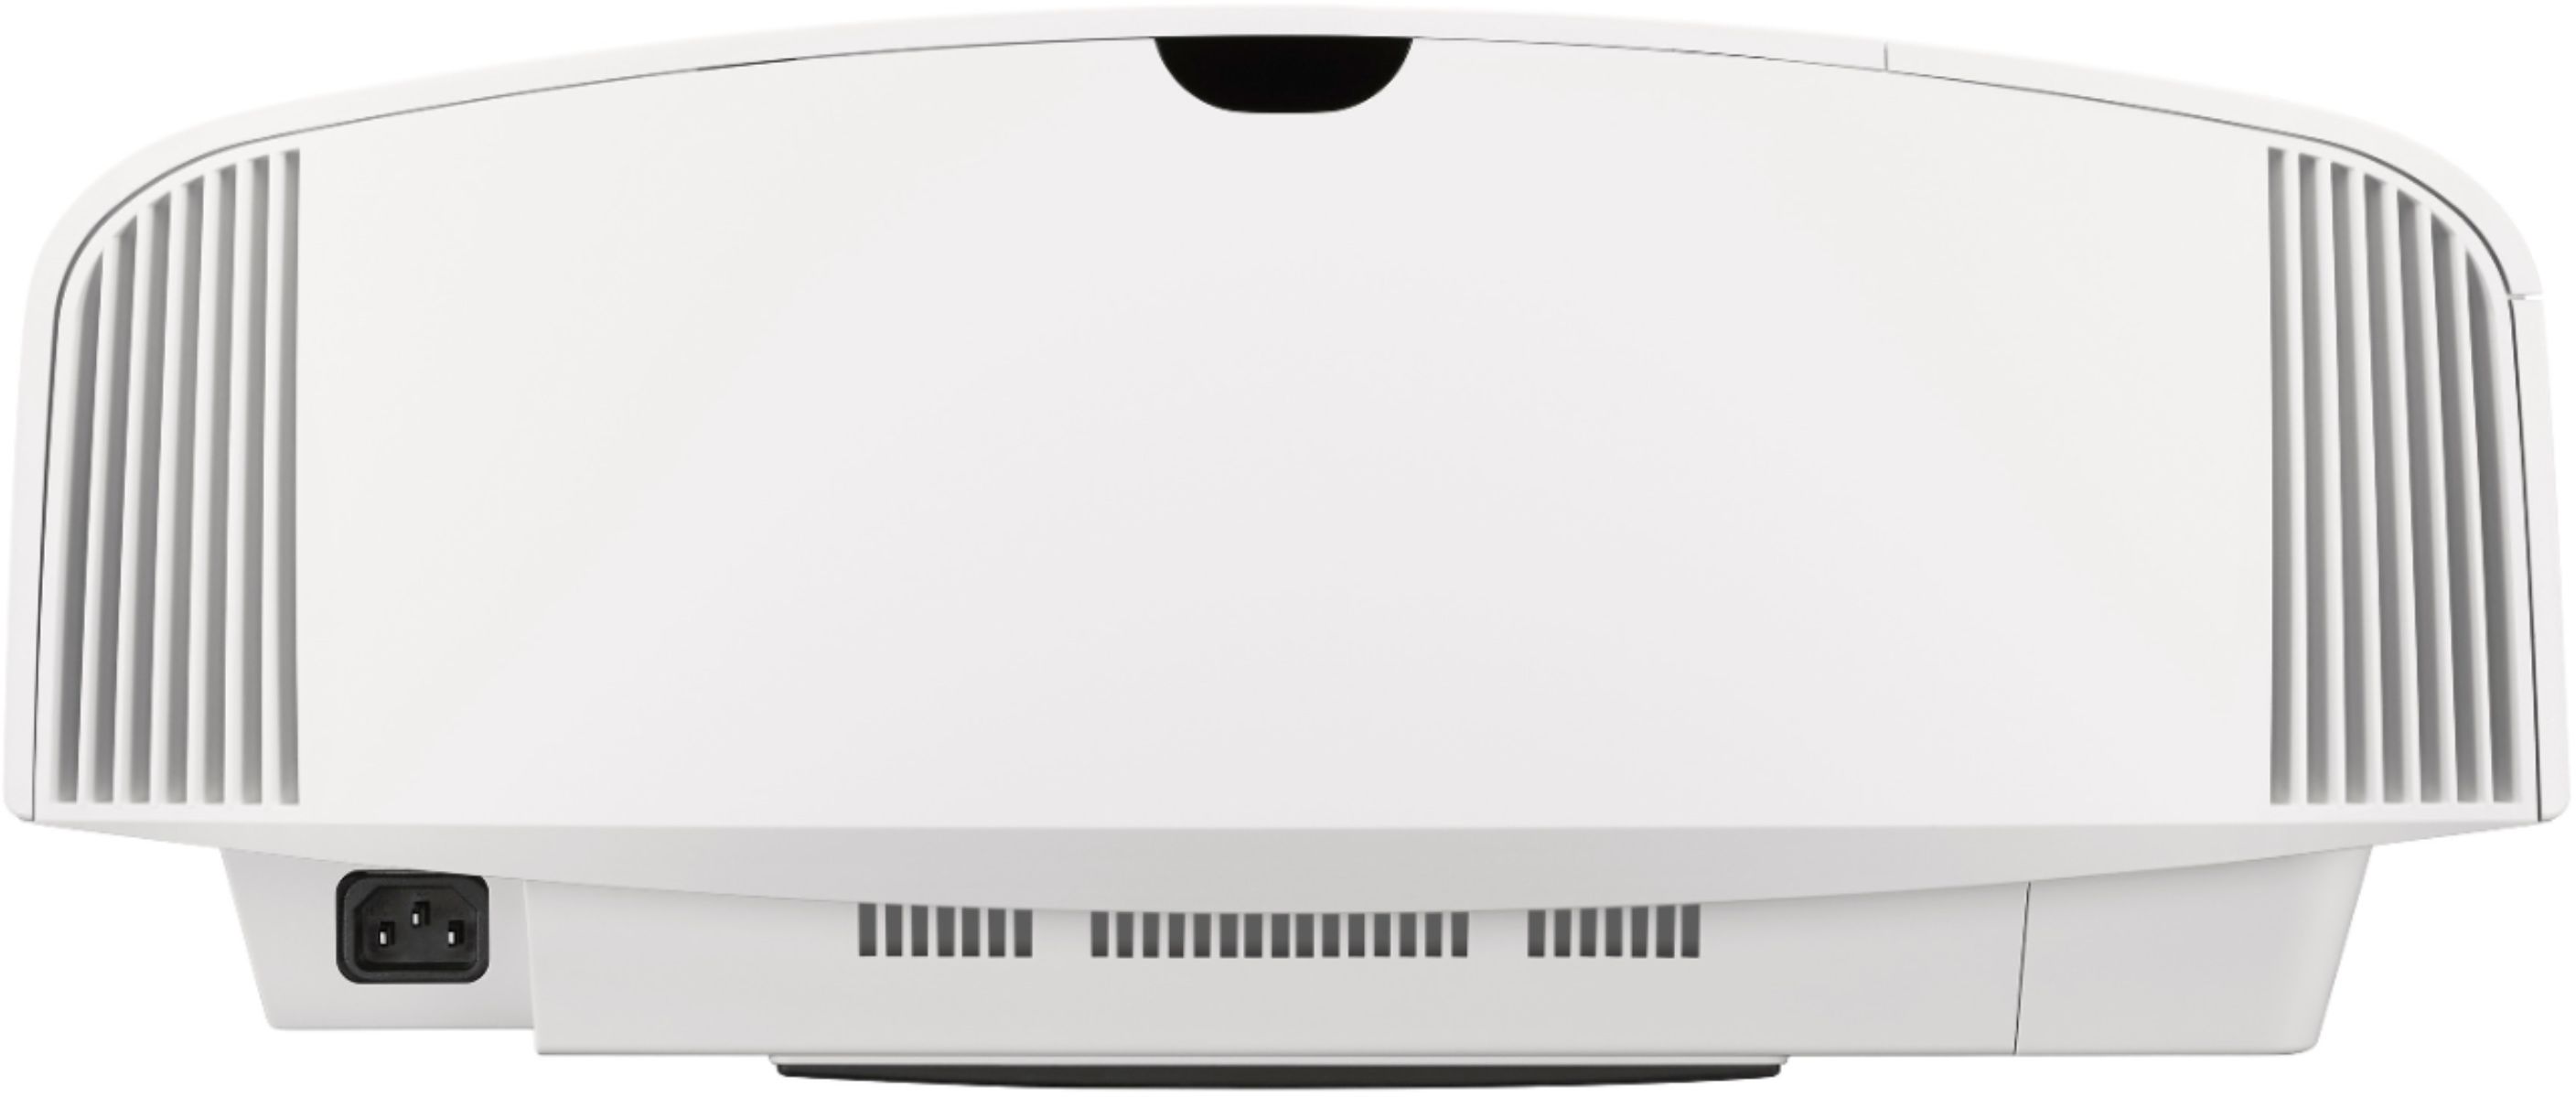 Back View: Sony - Premium 4K HDR Home Theater Projector - White